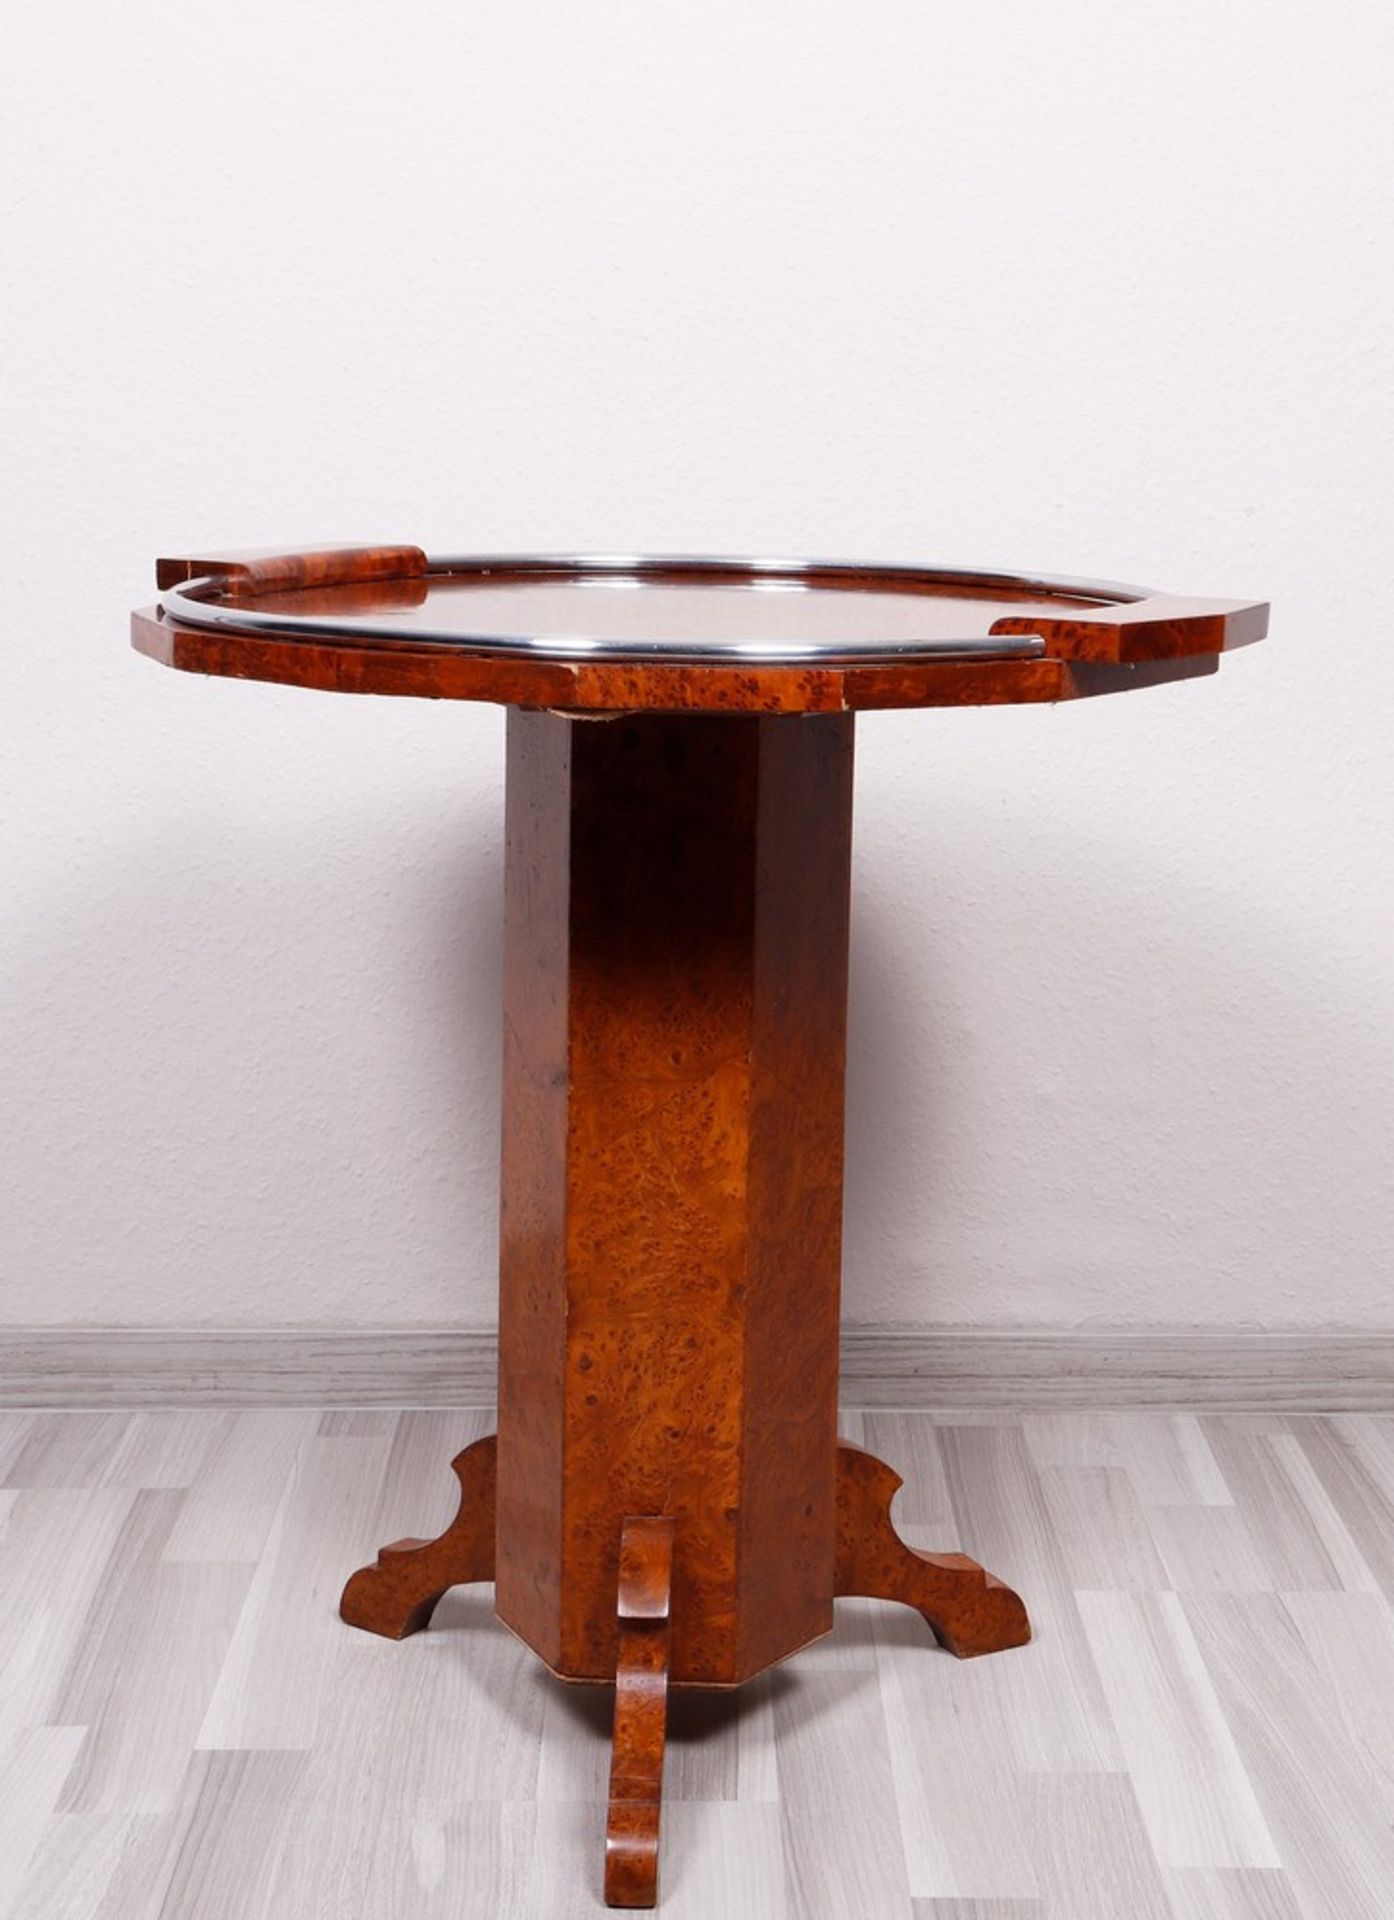 Art Deco smoking table, probably France, c. 1925/30